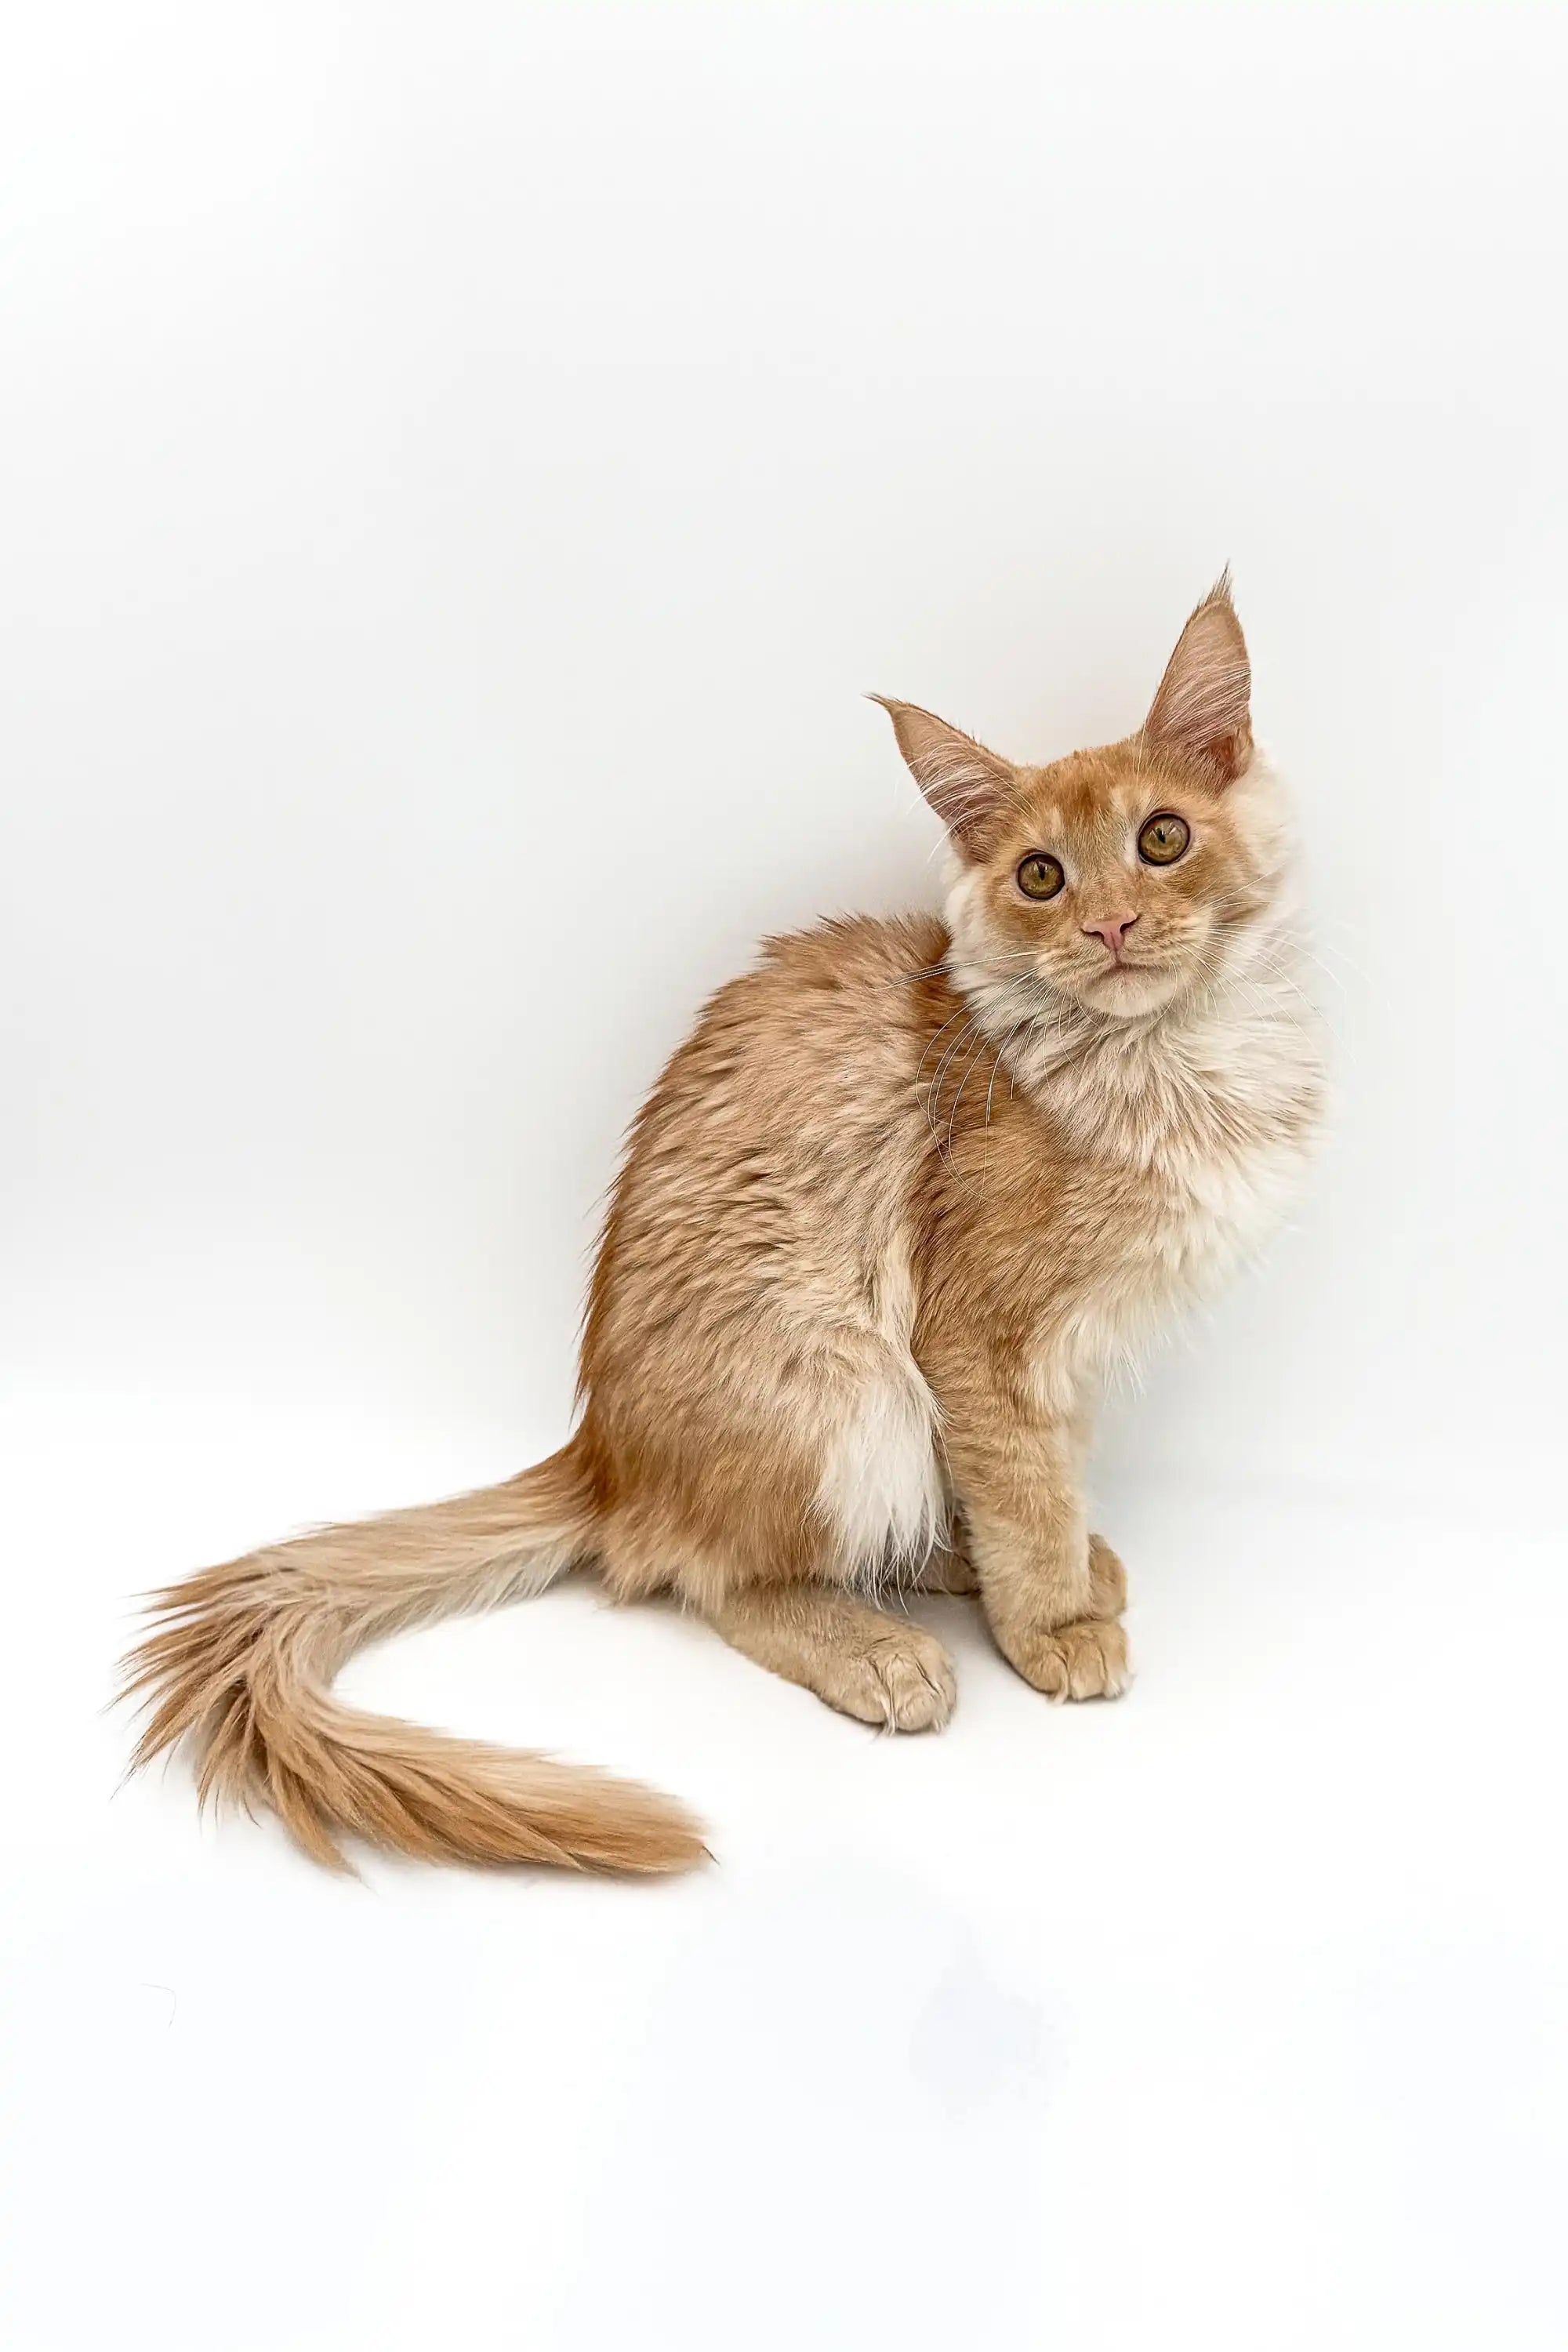 Maine Coon Kittens for Sale Prince | Kitten